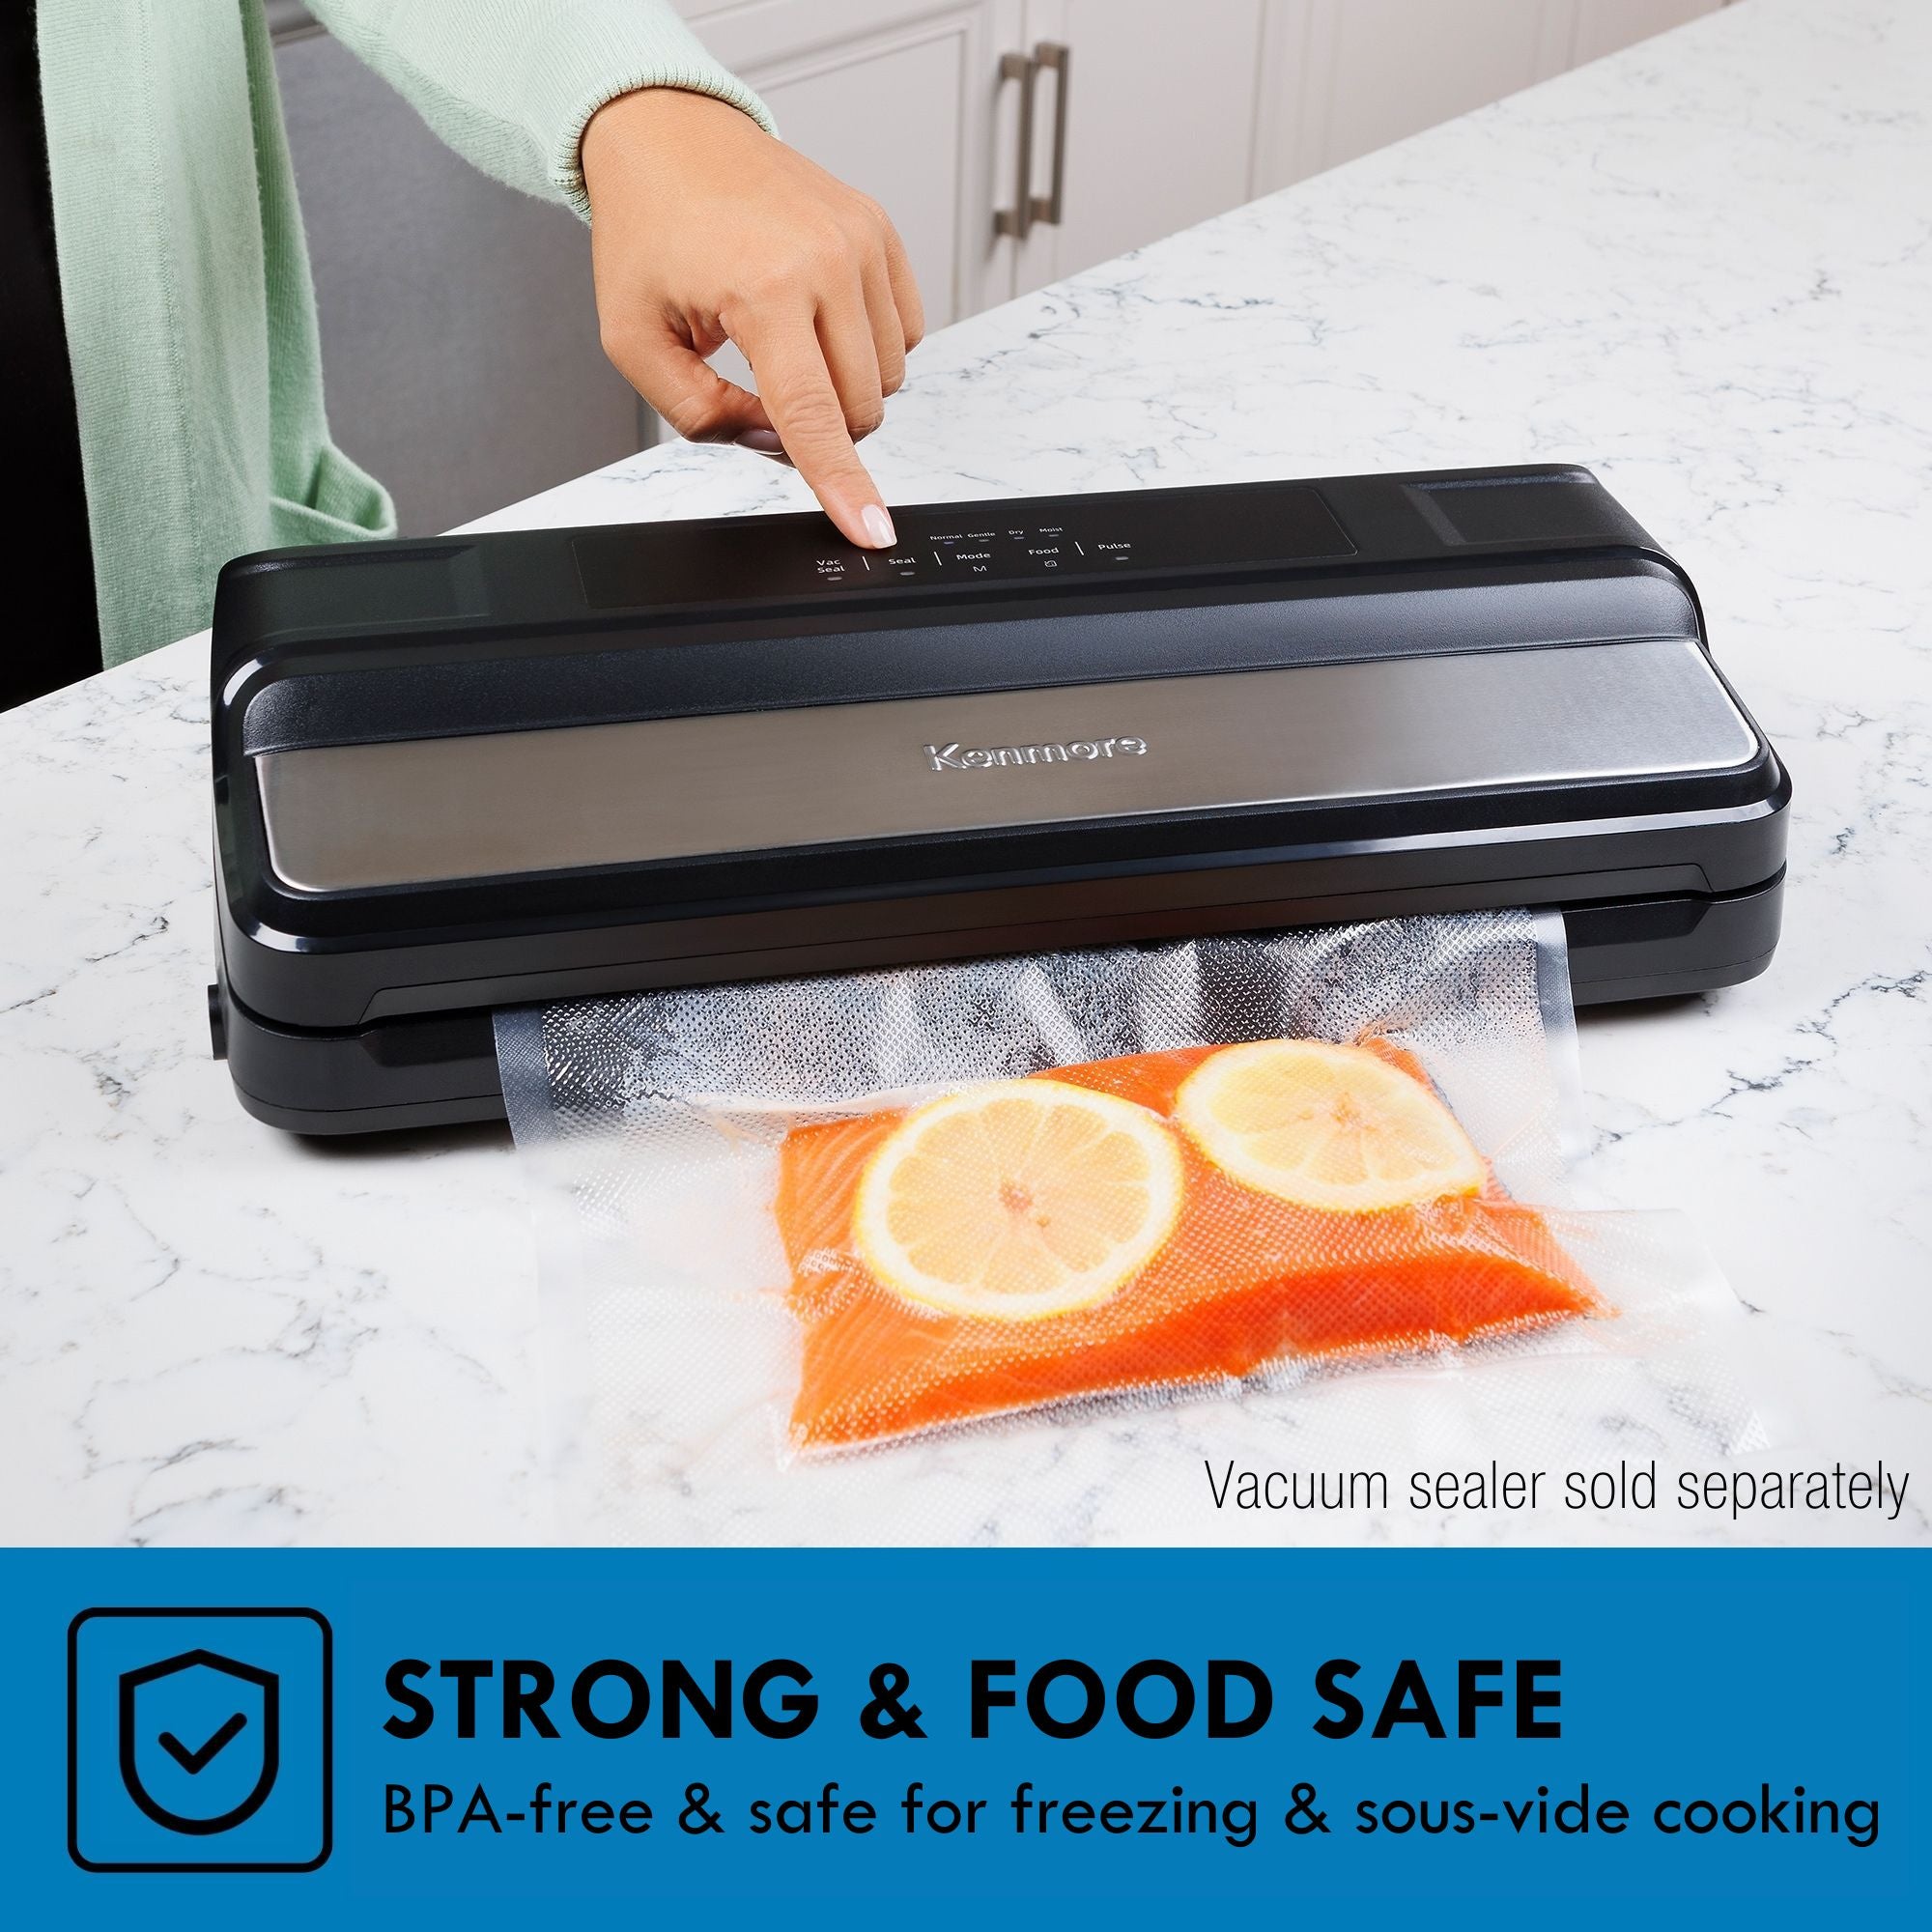 Kenmore vacuum sealer on a white and gray marble surface with a bag containing salmon and lemon slices and a person in a pale green cardigan touching the controls. Text below reads, "Strong and food-safe: BPA-free and safe for freezing and sous-vide cooking"